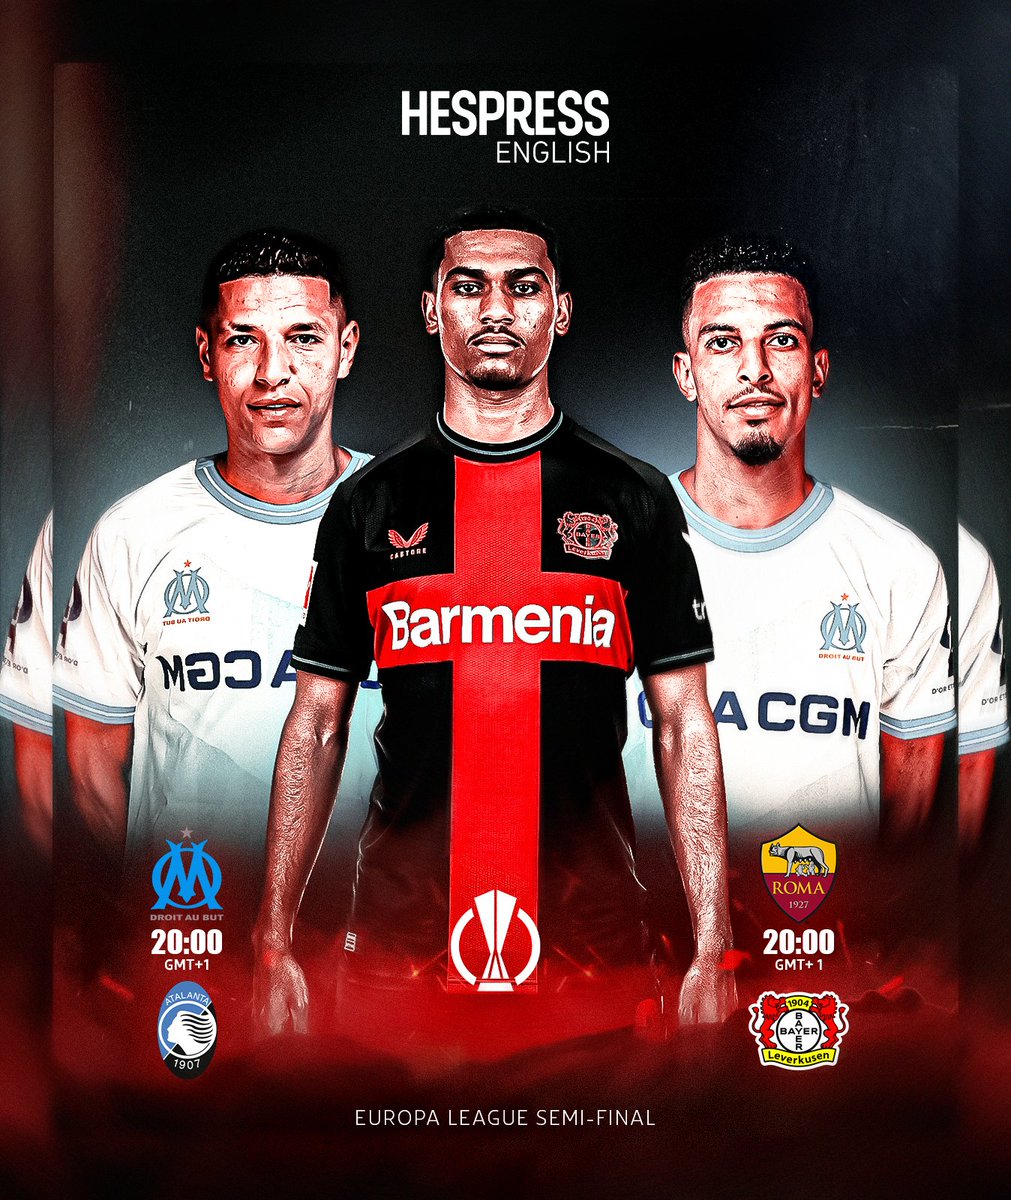 #AtlasLions Amine Harit, Azzedine Ounahi, and Amine Adli are set to compete in the first leg of the #EuropaLeague semifinals, with Marseille facing Atalanta and Bayer Leverkusen going head-to-head with Roma.